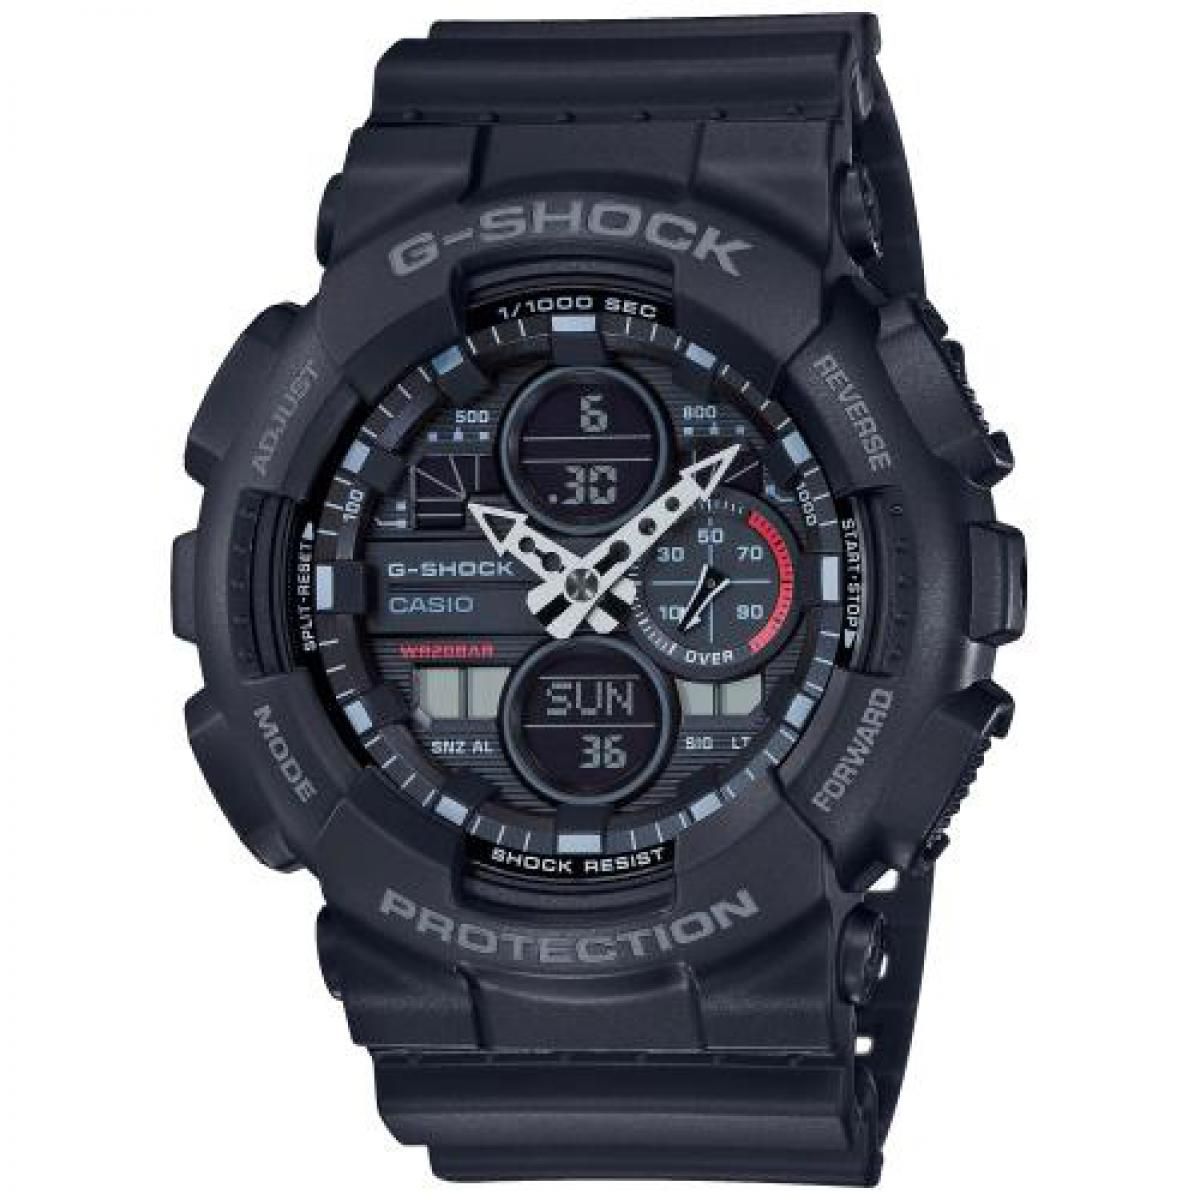 This Casio G-shock Analogue-Digital Watch for Men is the perfect timepiece to wear or to gift. It's Black 48 mm Round case combined with the comfortable Black Plastic will ensure you enjoy this stunning timepiece without any compromise. Operated by a high quality Quartz movement and water resistant to 20 bars, your watch will keep ticking. Stylish- Sporty and a modern design, very suitable for Men -The watch has a calendar function: Day-Date, Worldtime, Stop Watch, Timer, Alarm, Light High quality 21 cm length, 28 mm wide, Black Plastic strap with a Buckle Case diameter: 48 mm, Case height: 14 mm and Case color: Black Dial color: Black